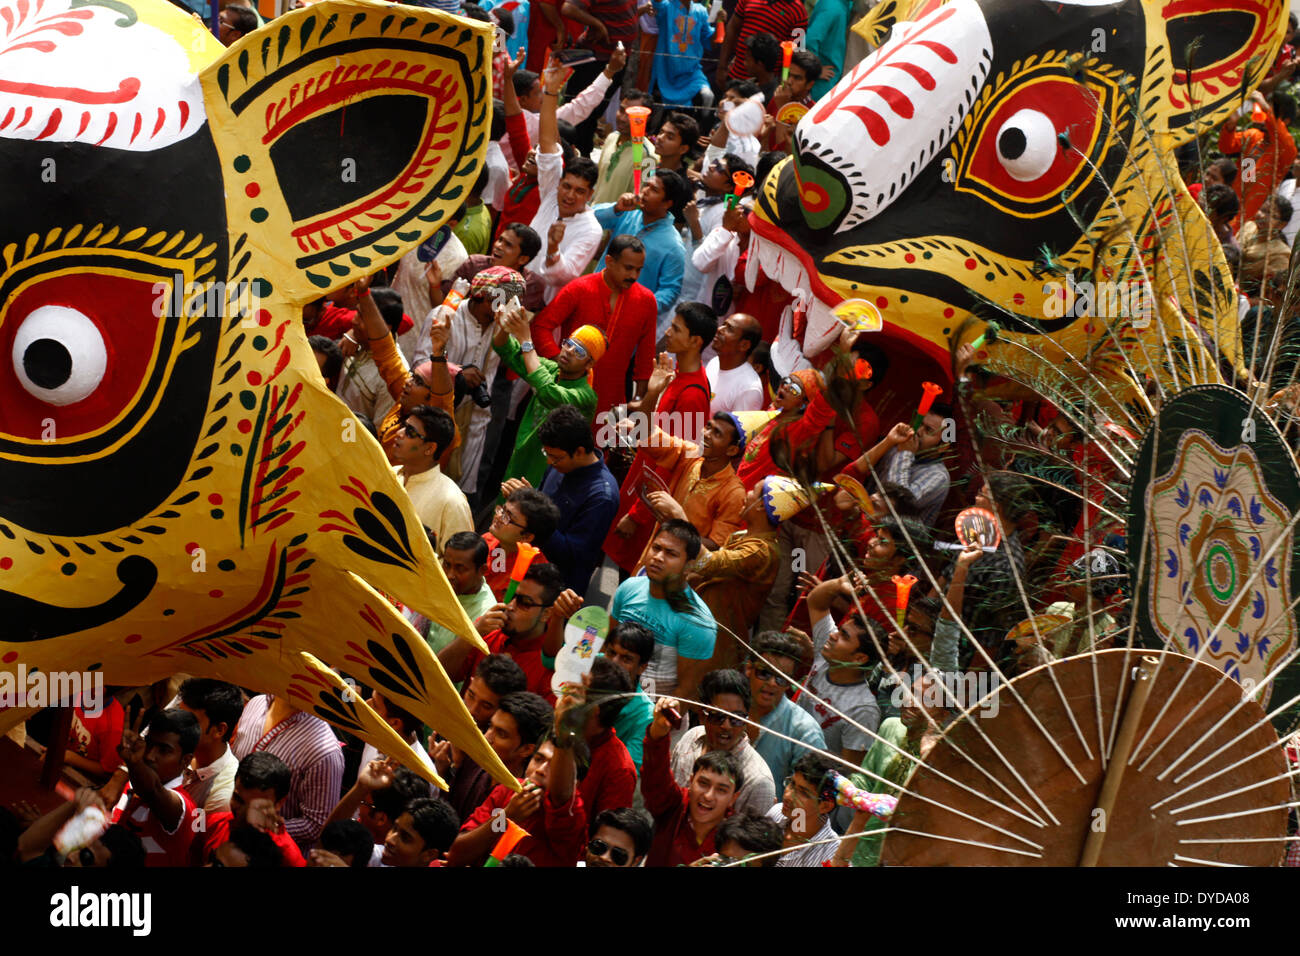 DHAKA, BANGLADESH - APRIL 14: Bangladeshi revelers march during a rally in celebration of the Bengali New Year, or “Pohela Boishakh”, in Dhaka. Pahela Baishakh, the first day of the Bangla month, can be traced back to its origins during the Mughal period when Emperor Akbar introduced the Bangla calendar to streamline tax collection while in the course of time it became part of Bangali culture and tradition. (Photo by Zakir Hossain Chowdhury/Pacific Press/Alamy Live News) Stock Photo